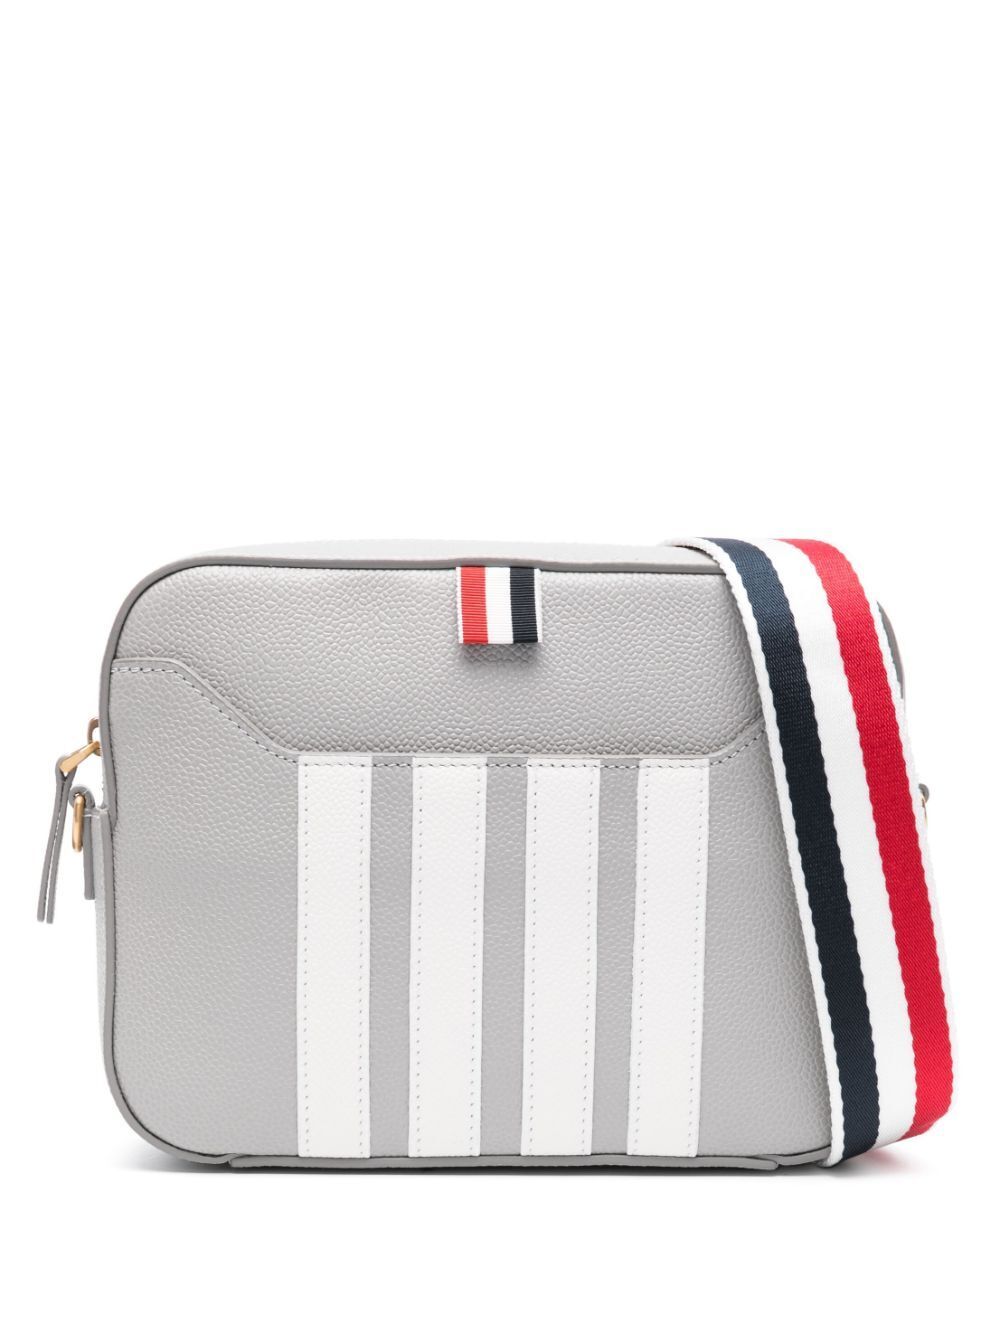 Thom Browne Small Camera Bag With Rwb Strap &amp; 4 Bar Stripes In Pebble Grain Leather In Grey